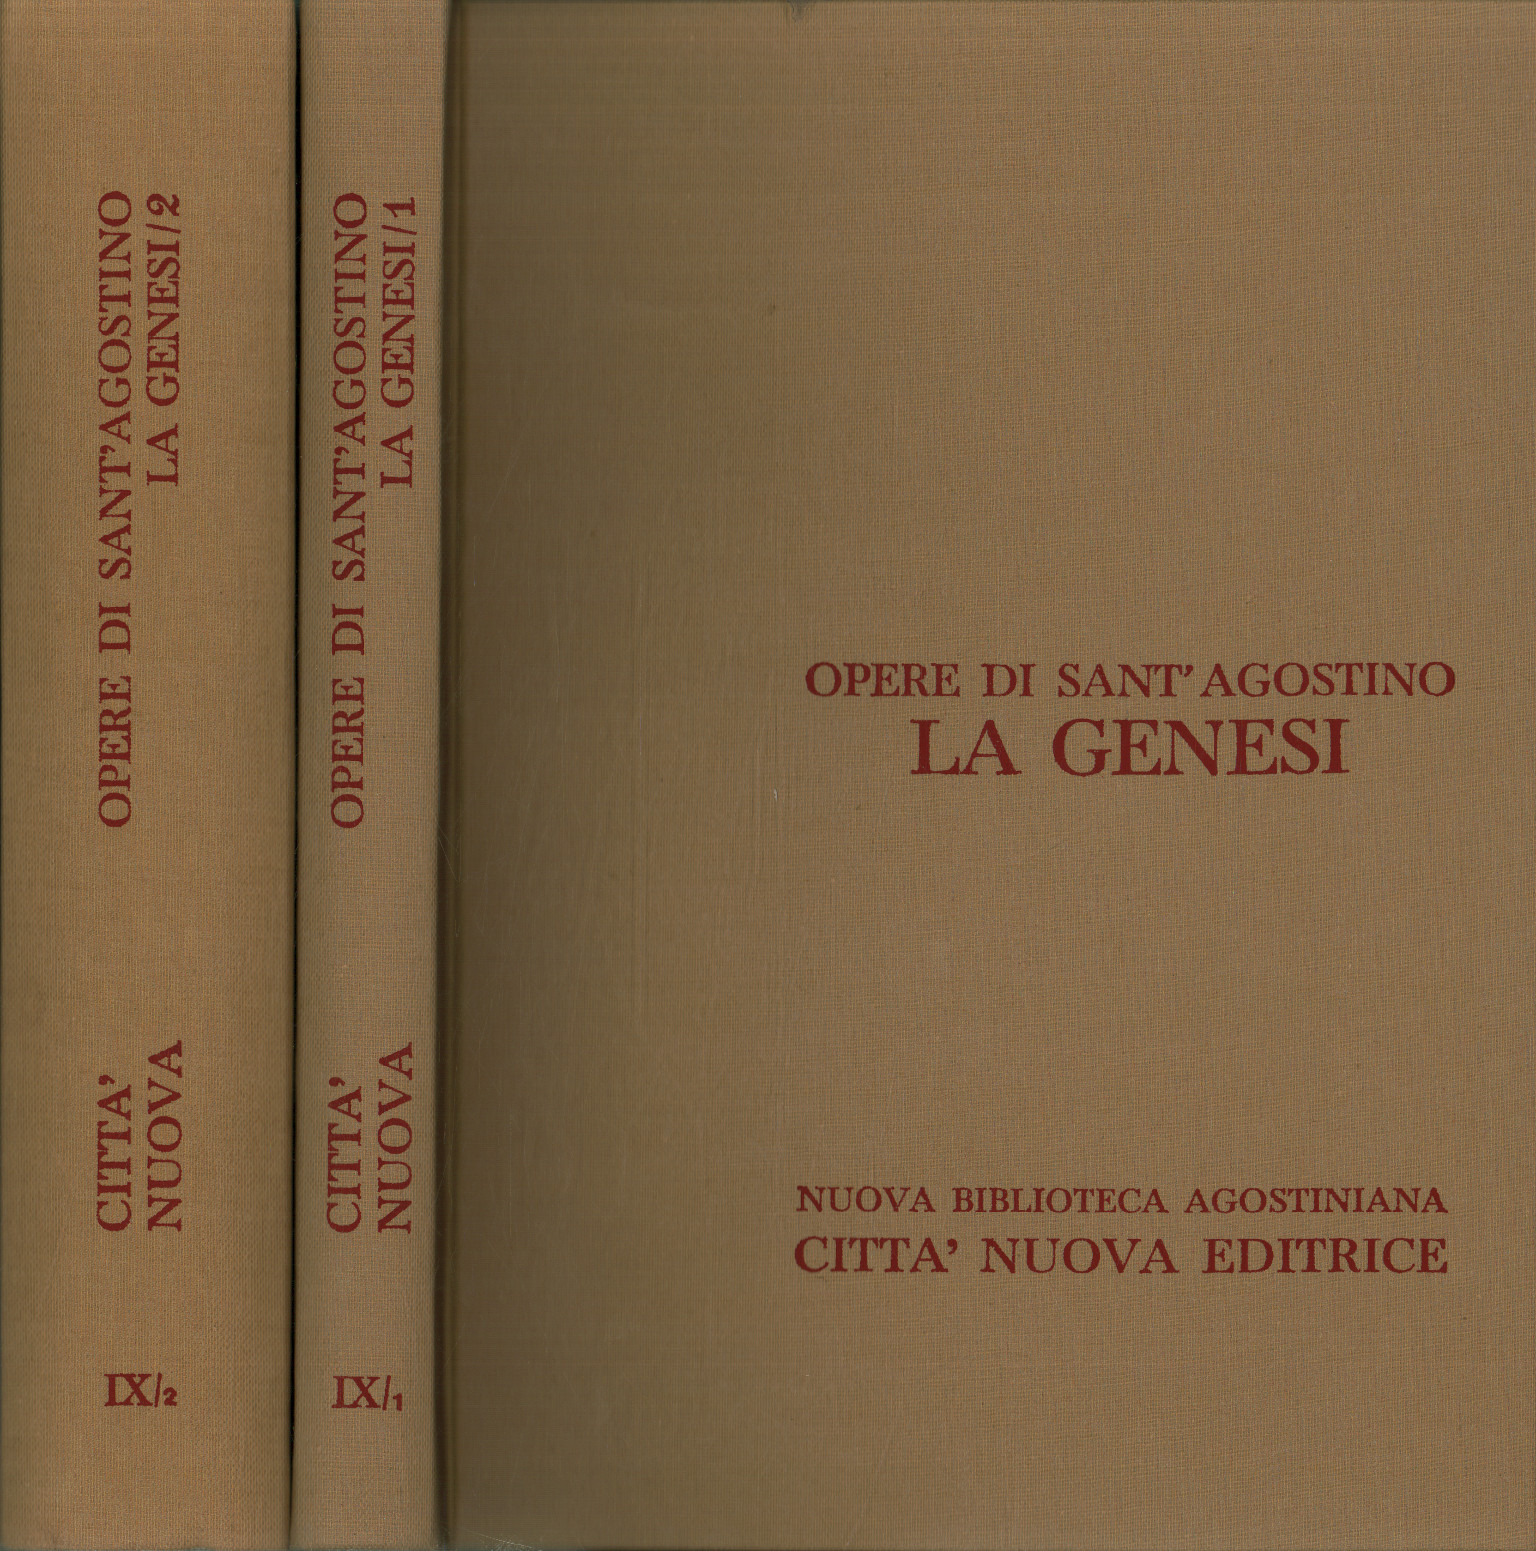 Works of Sant'Agostino. The Gene